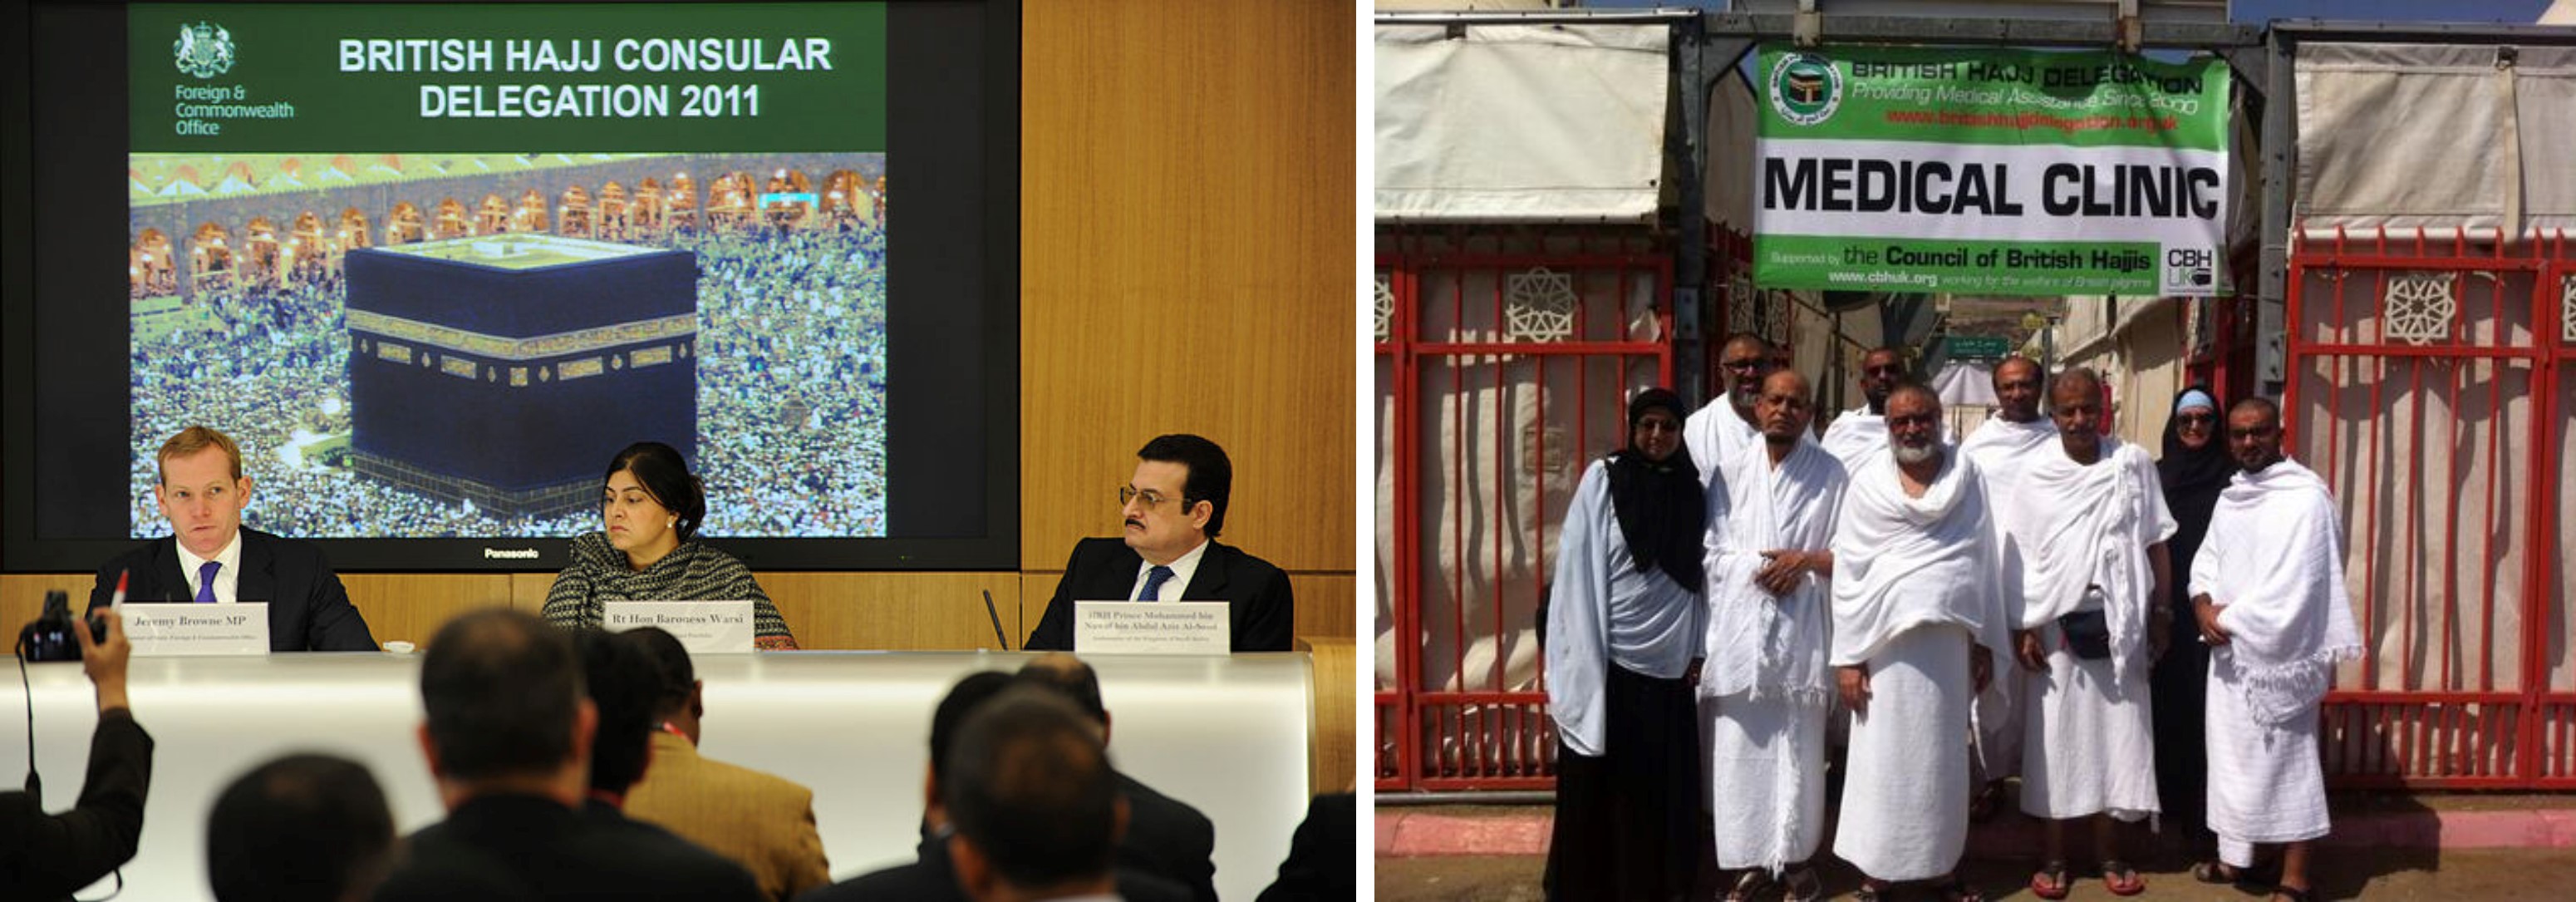 On the left, launch of the British Hajj Consular Delegation. On the right, the British Hajj Delegation Clinic.